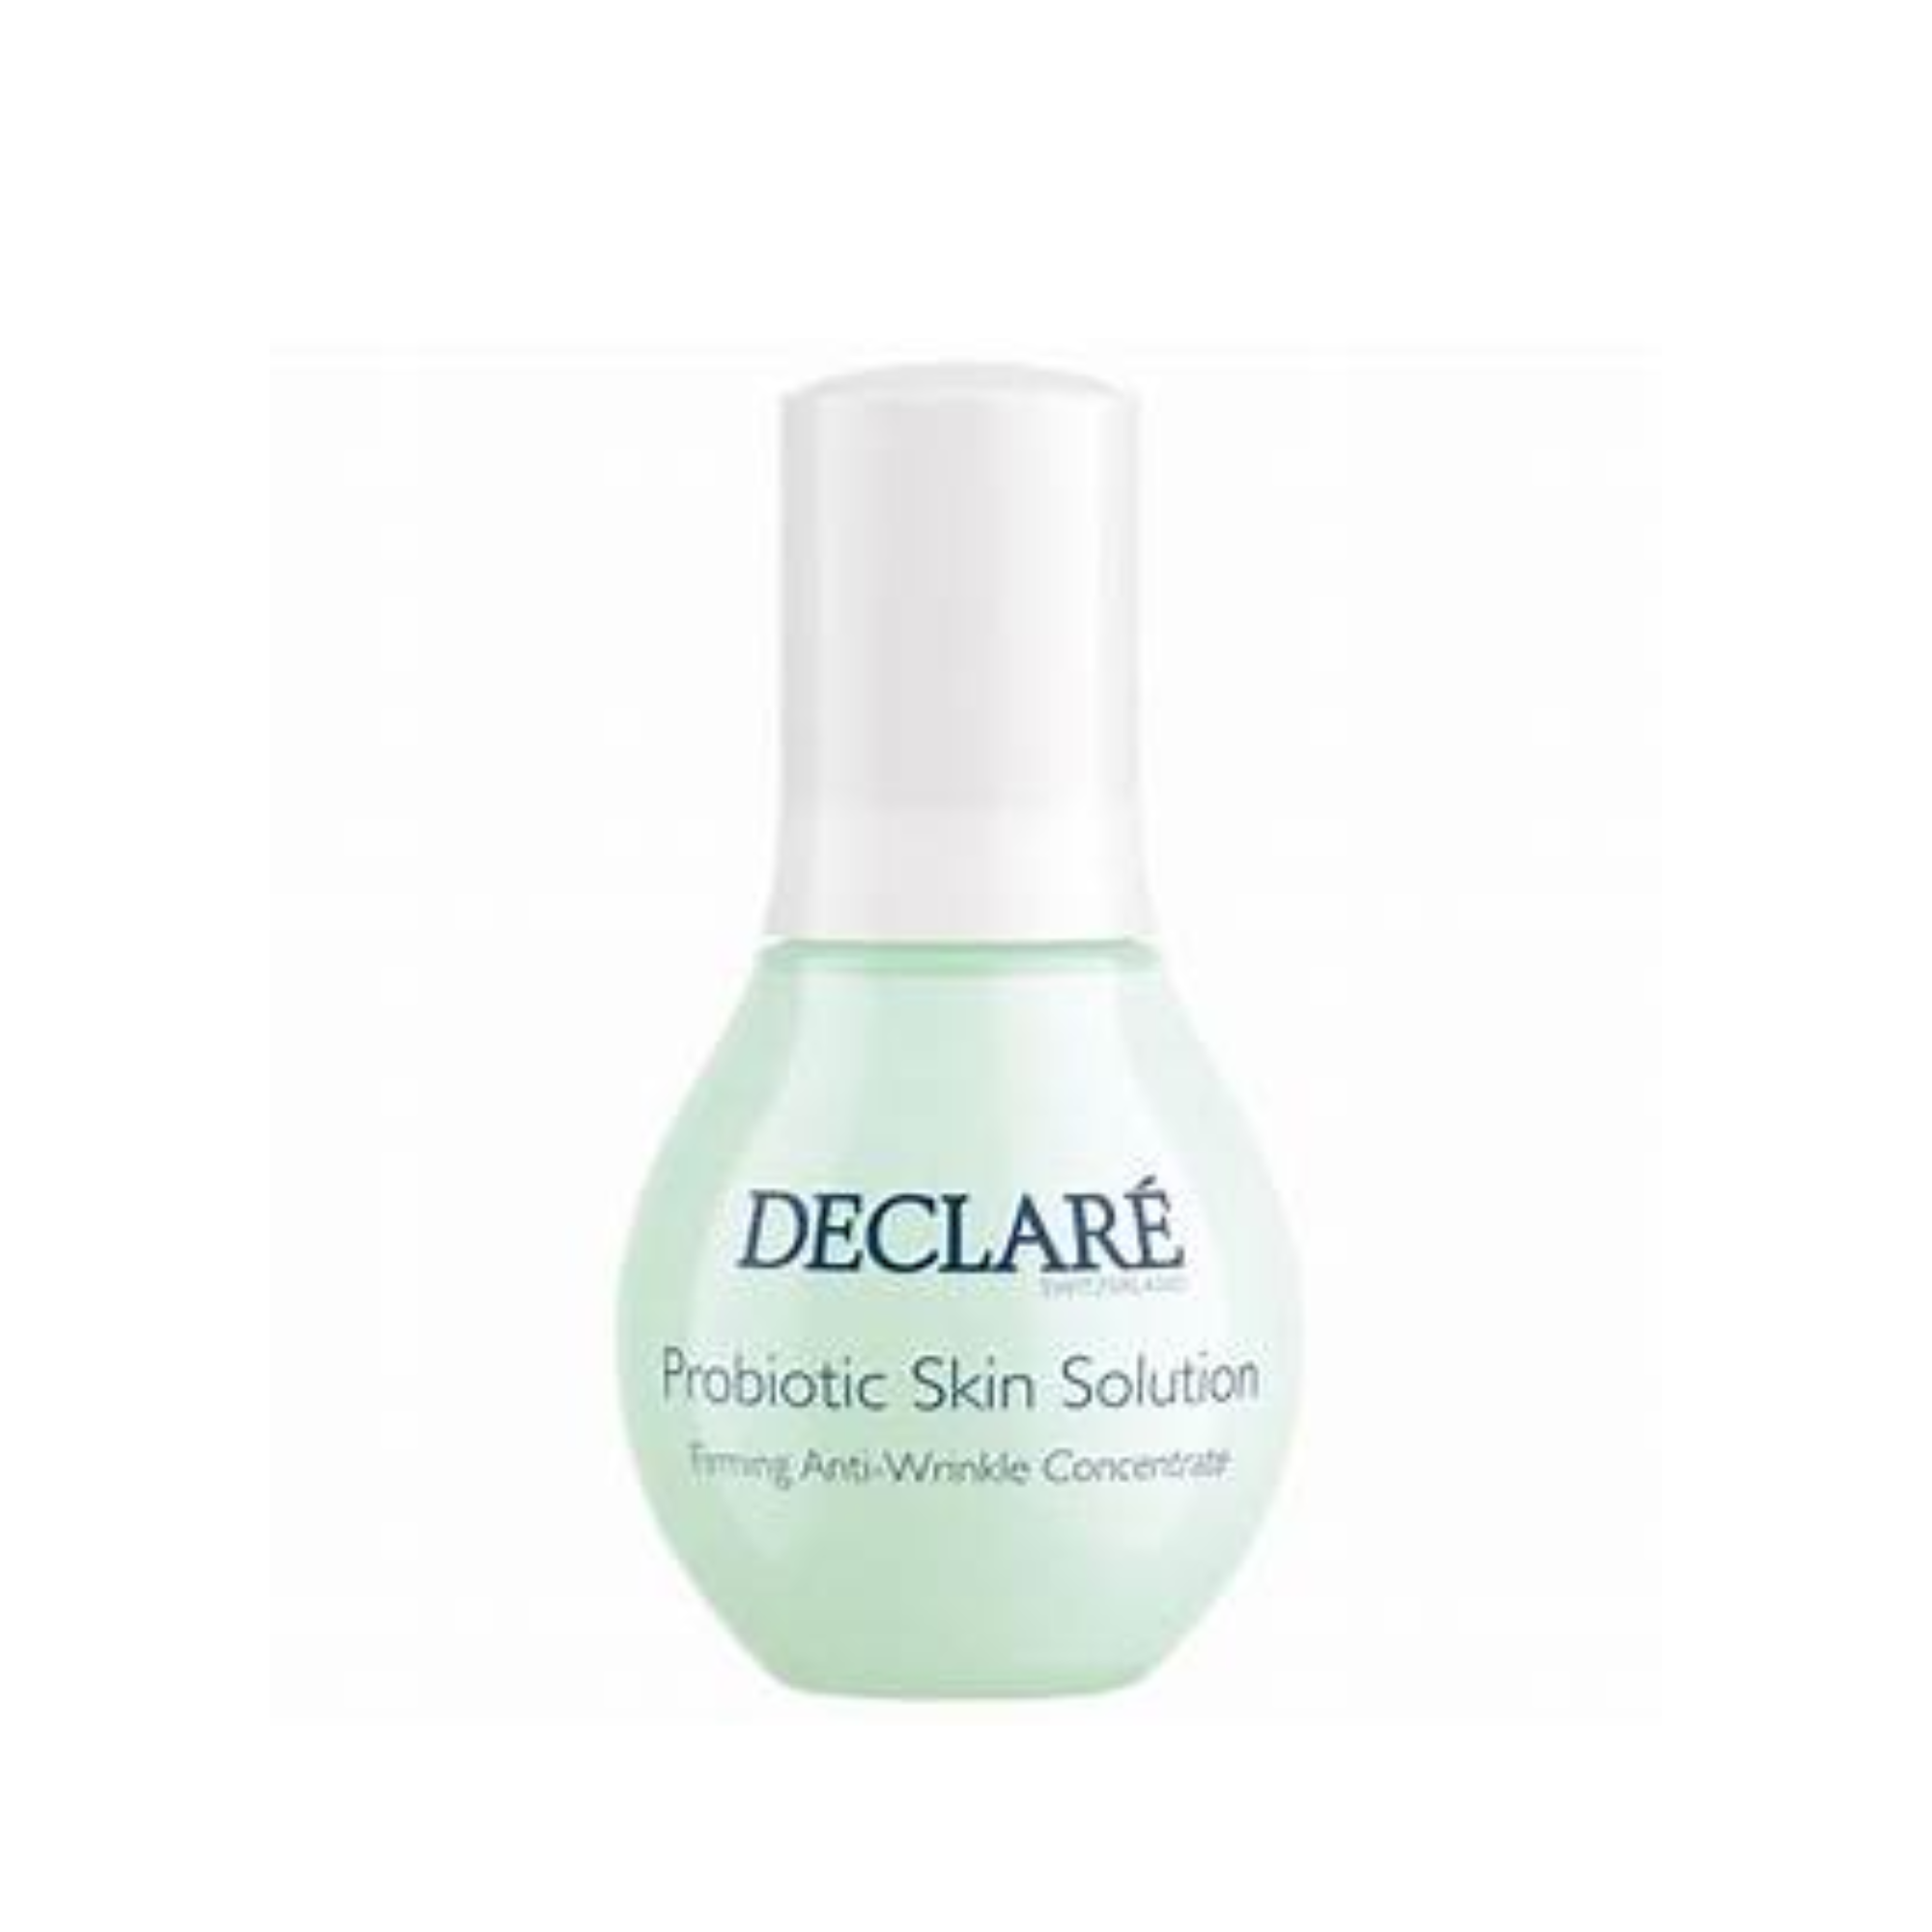 Declare Probiotic Skin Solution Anti Wrinkle Concentrate